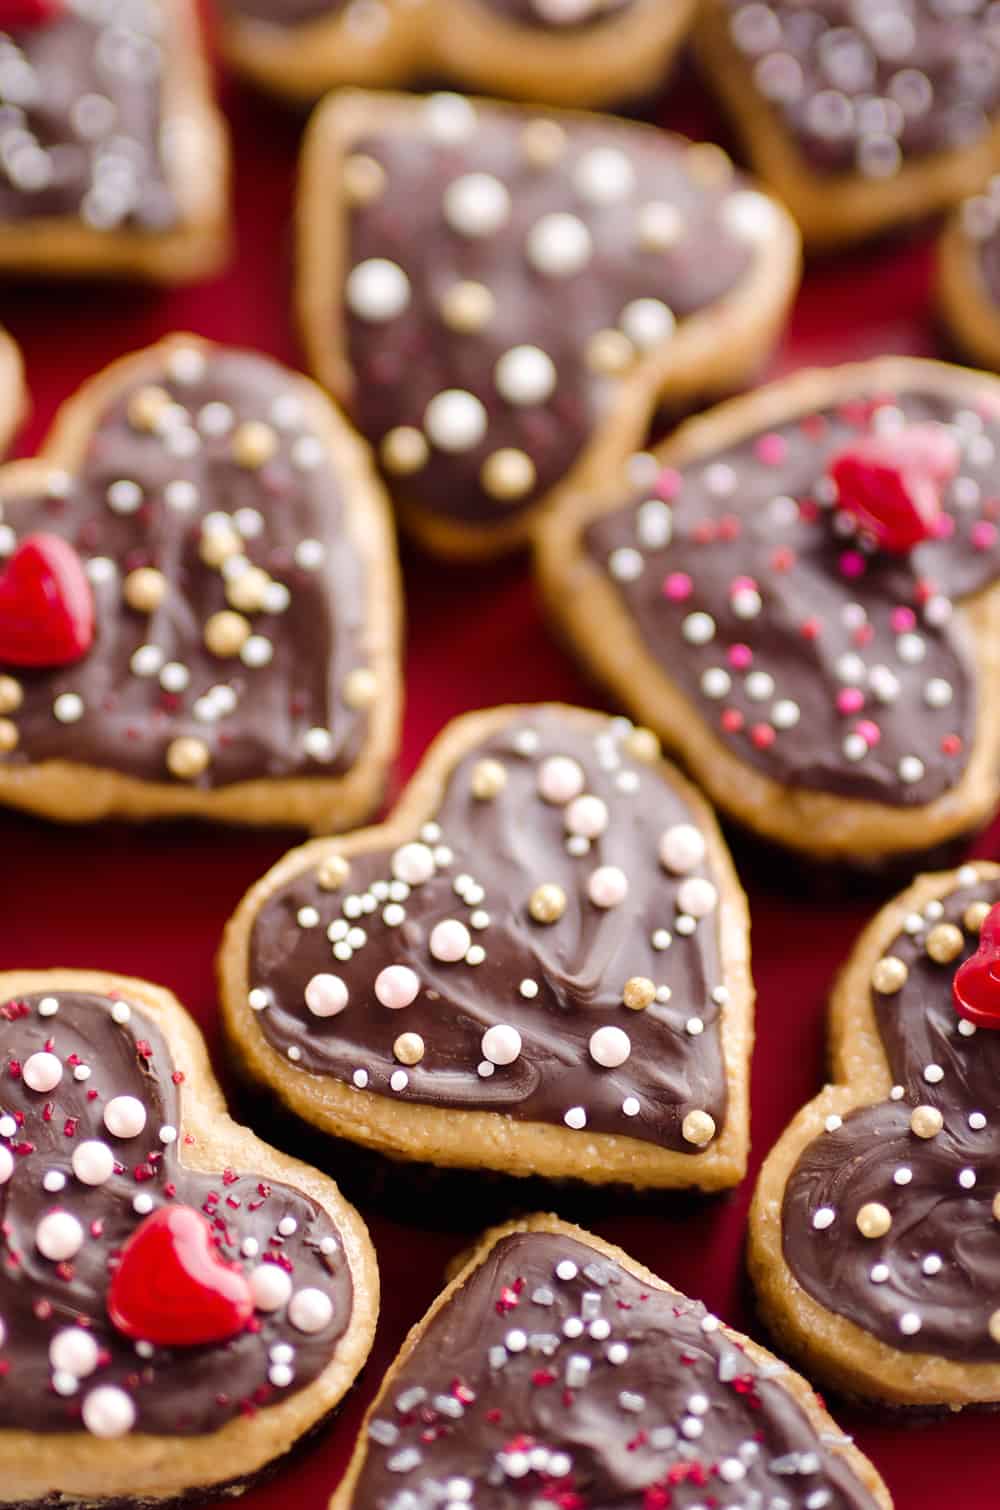 Peanut Butter Buckeye Brownie Hearts are the perfect sweet for your special Valentine. They combine two of the best desserts into one amazing treat with brownies and peanut butter buckeyes!